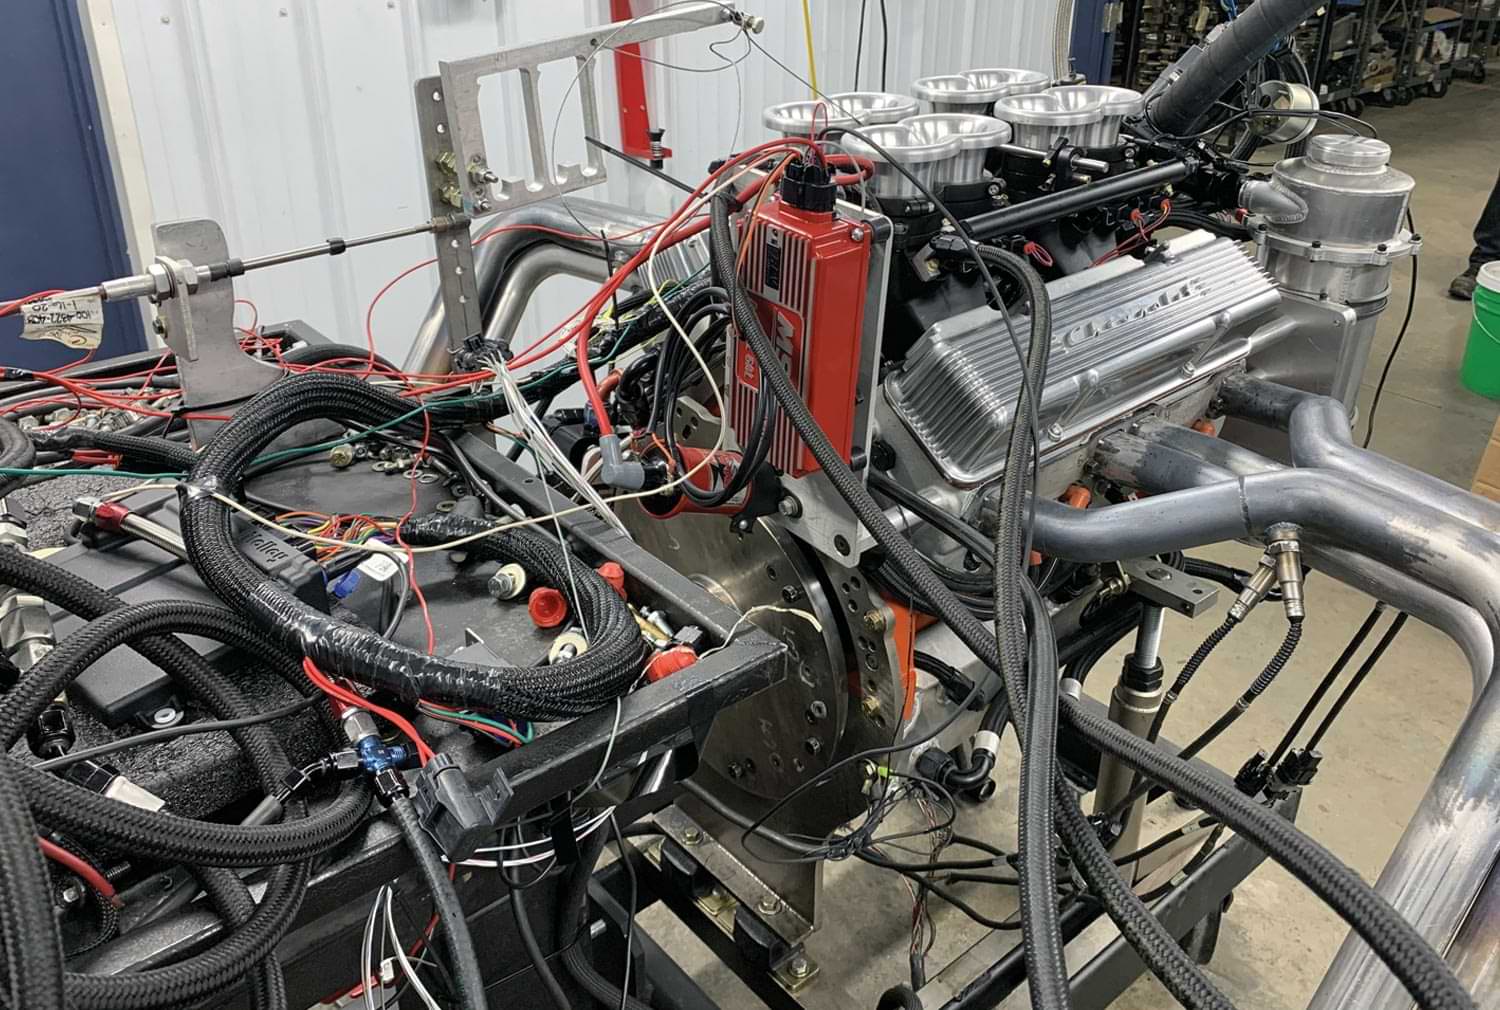 view of block engine with various wires, valves and tubing connected